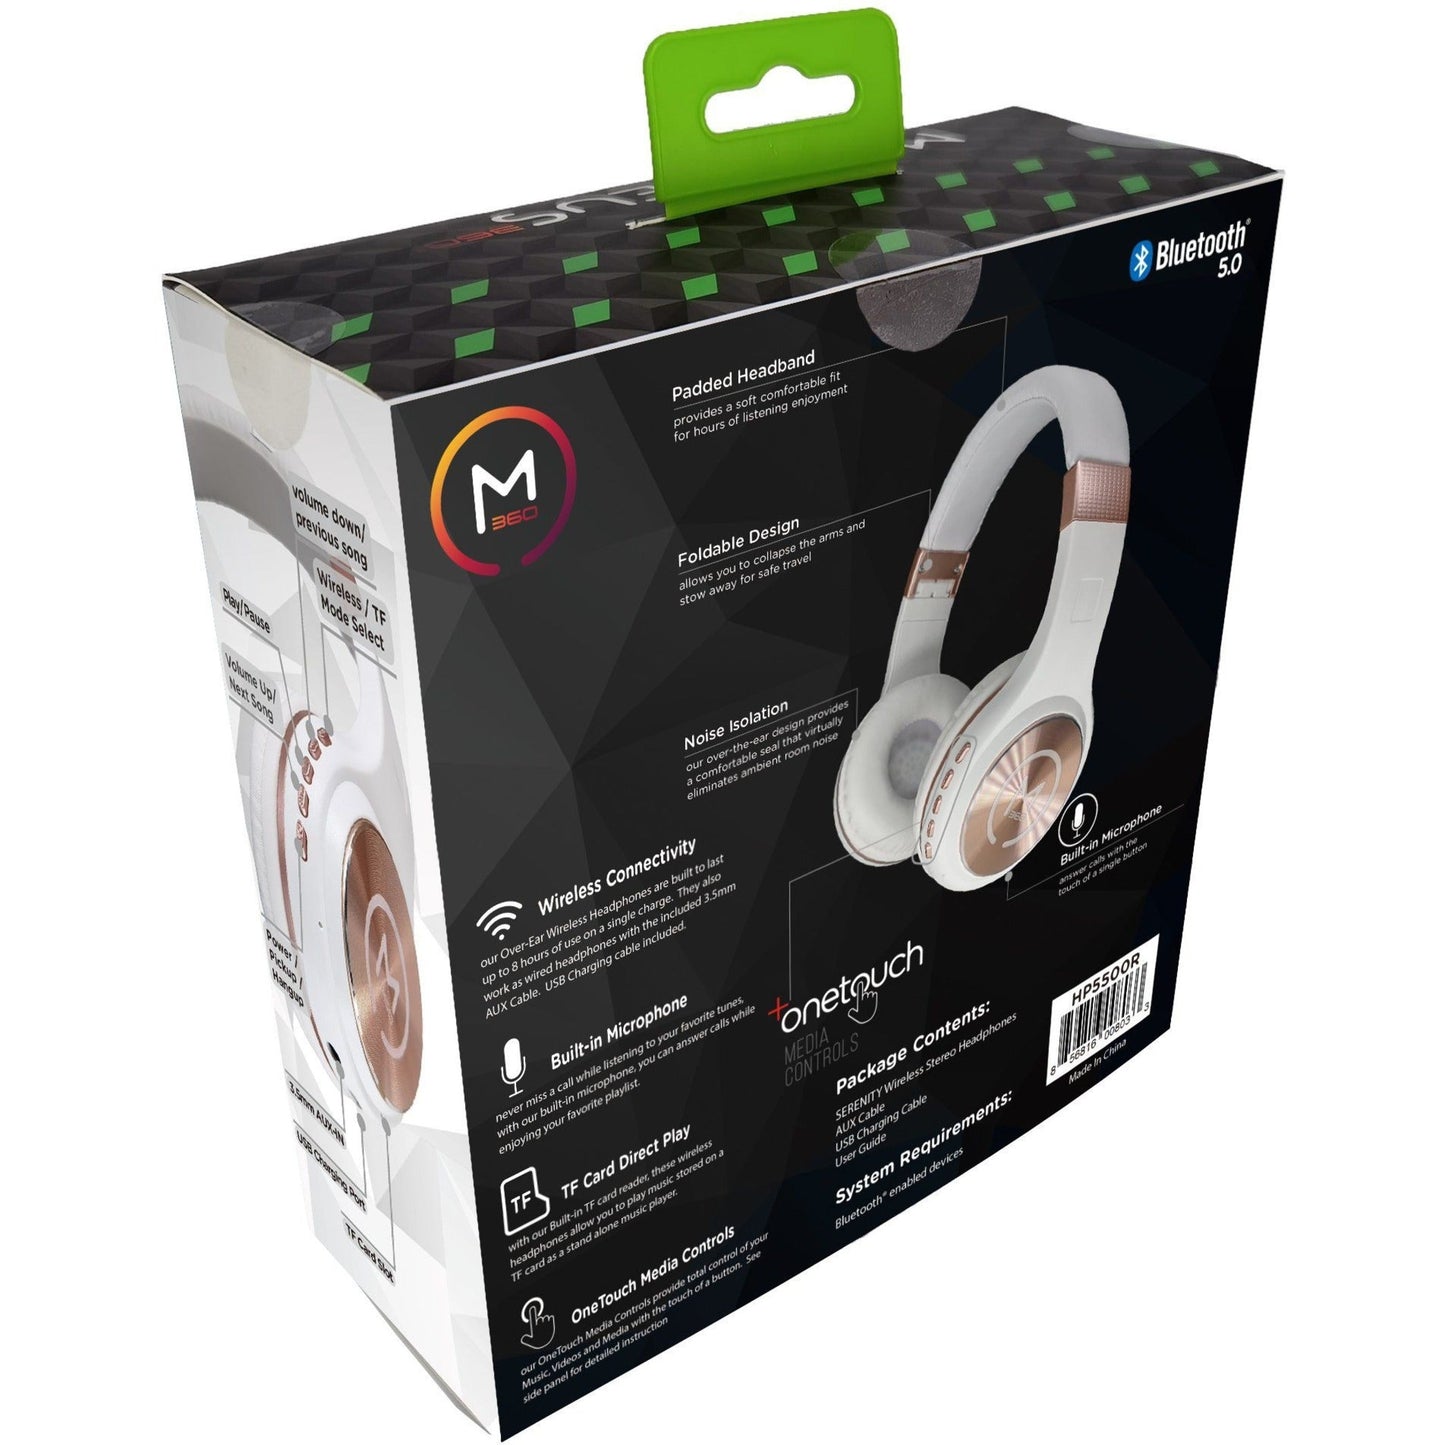 Morpheus 360 Serenity Wireless Over-the-Ear Headphones - Bluetooth 5.0 Headset with Microphone - HP5500R